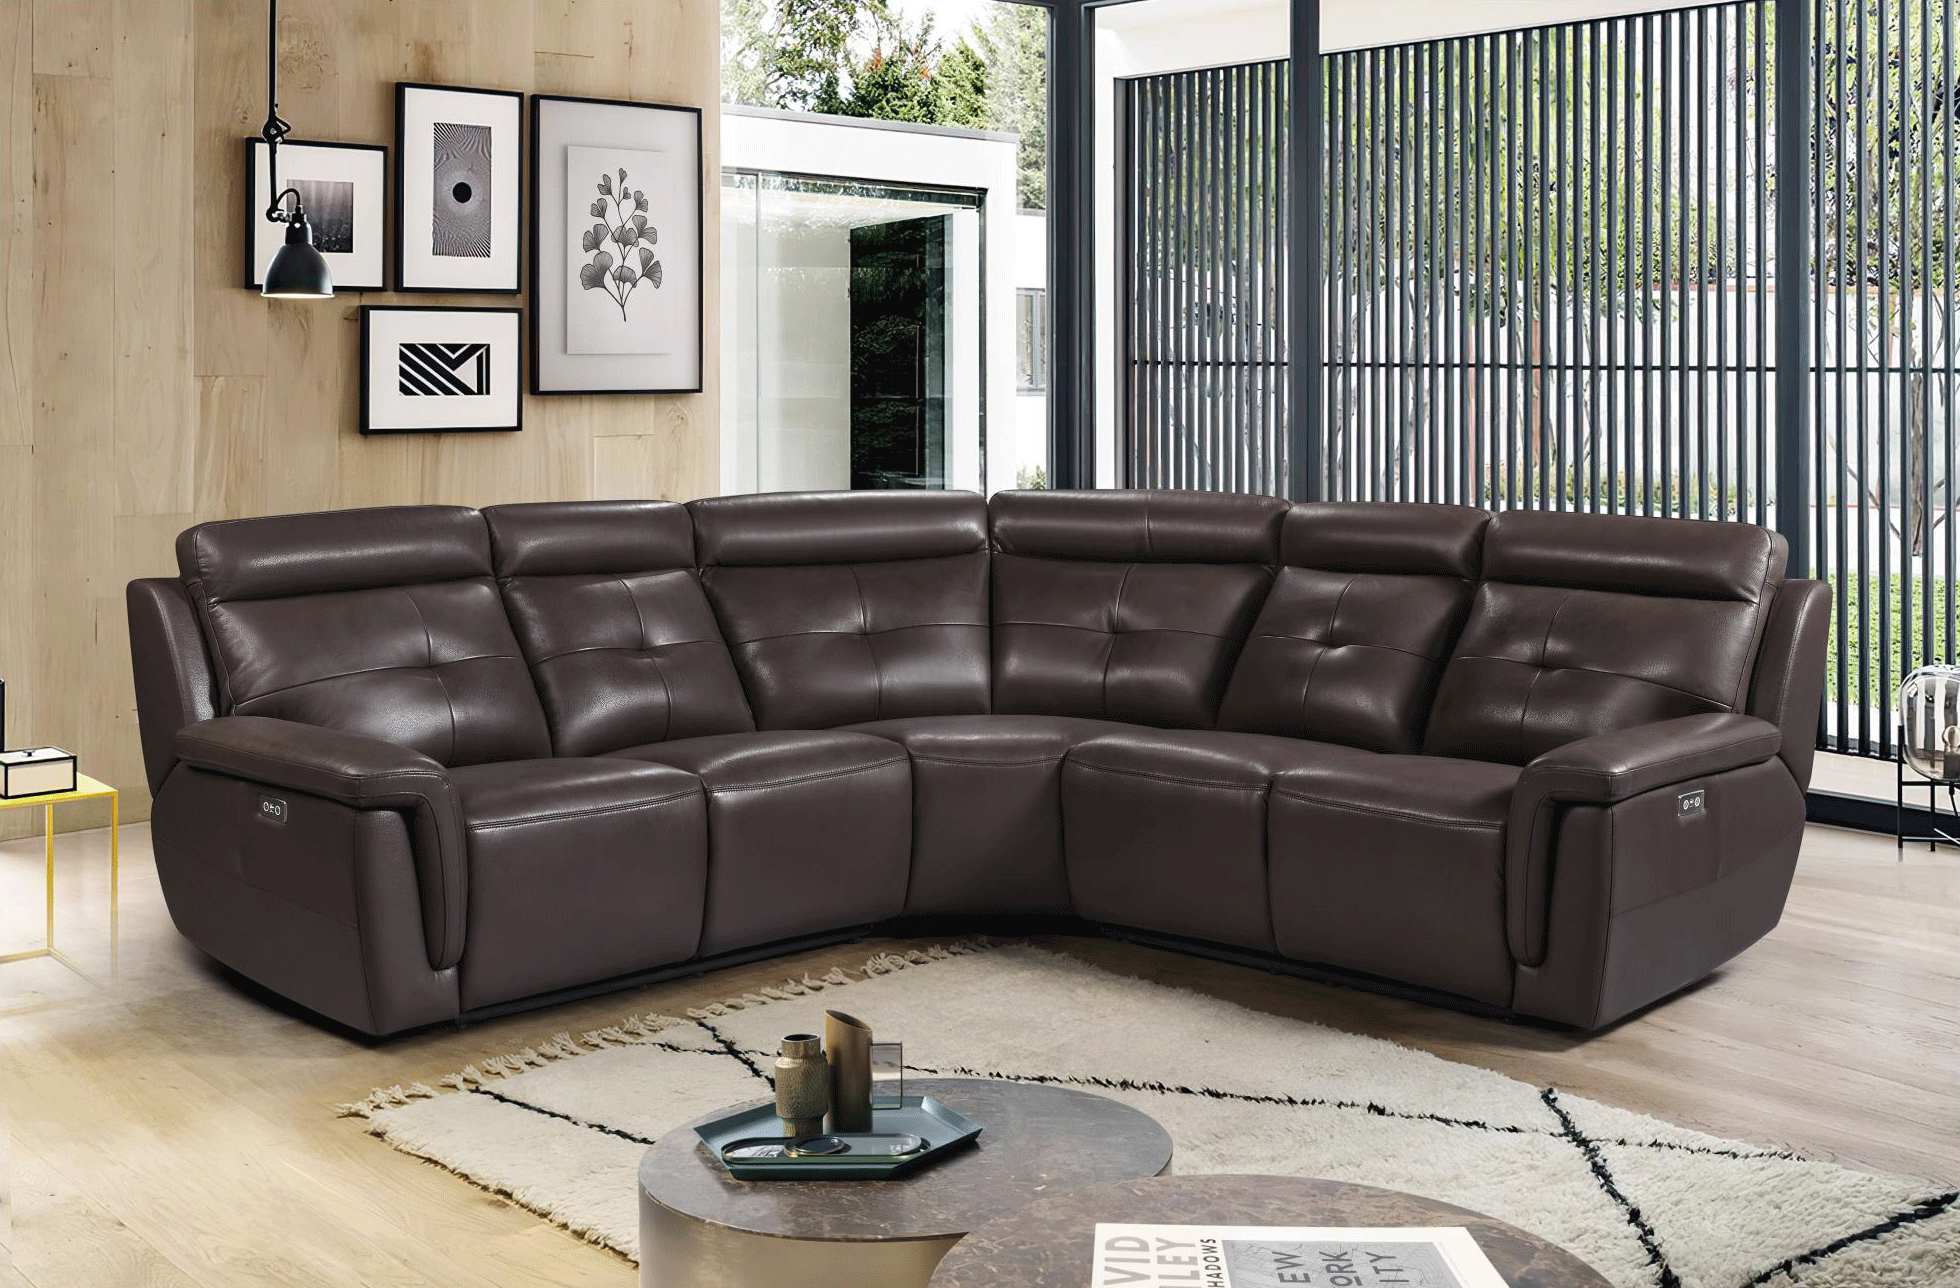 Living Room Furniture Sleepers Sofas Loveseats and Chairs 2937 Sectional w/ electric recliners